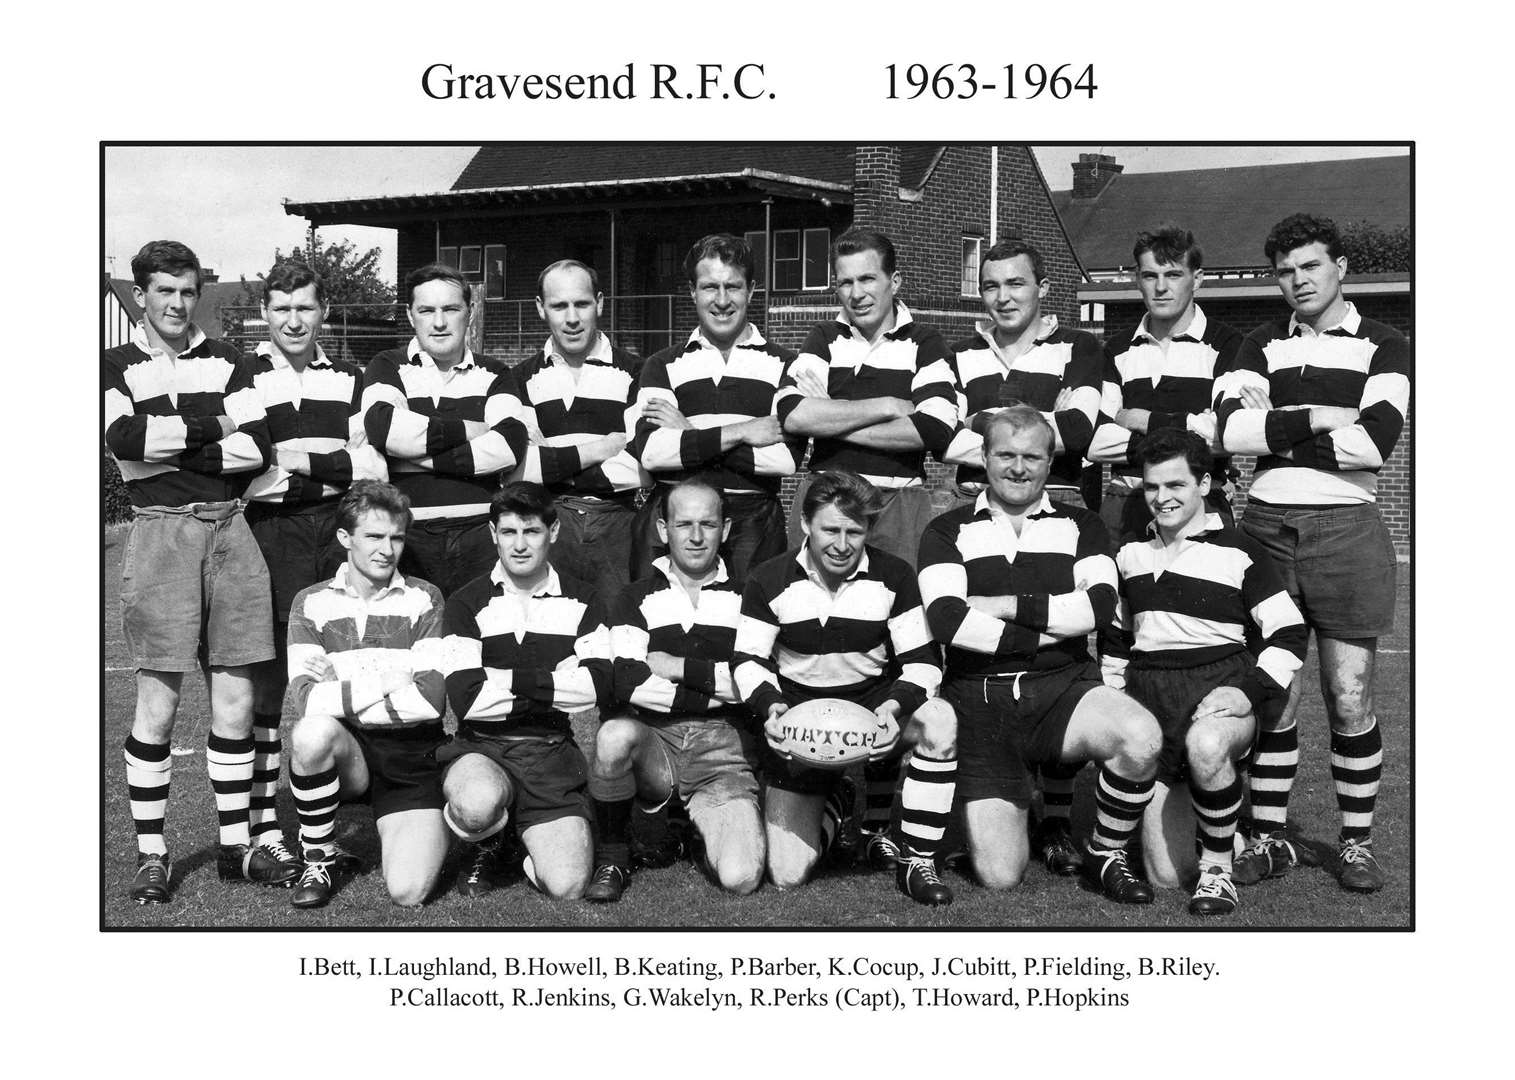 The Gravesend Rugby Football Club team 1963/64. Peter Barber pictured second row, centre (6656325)